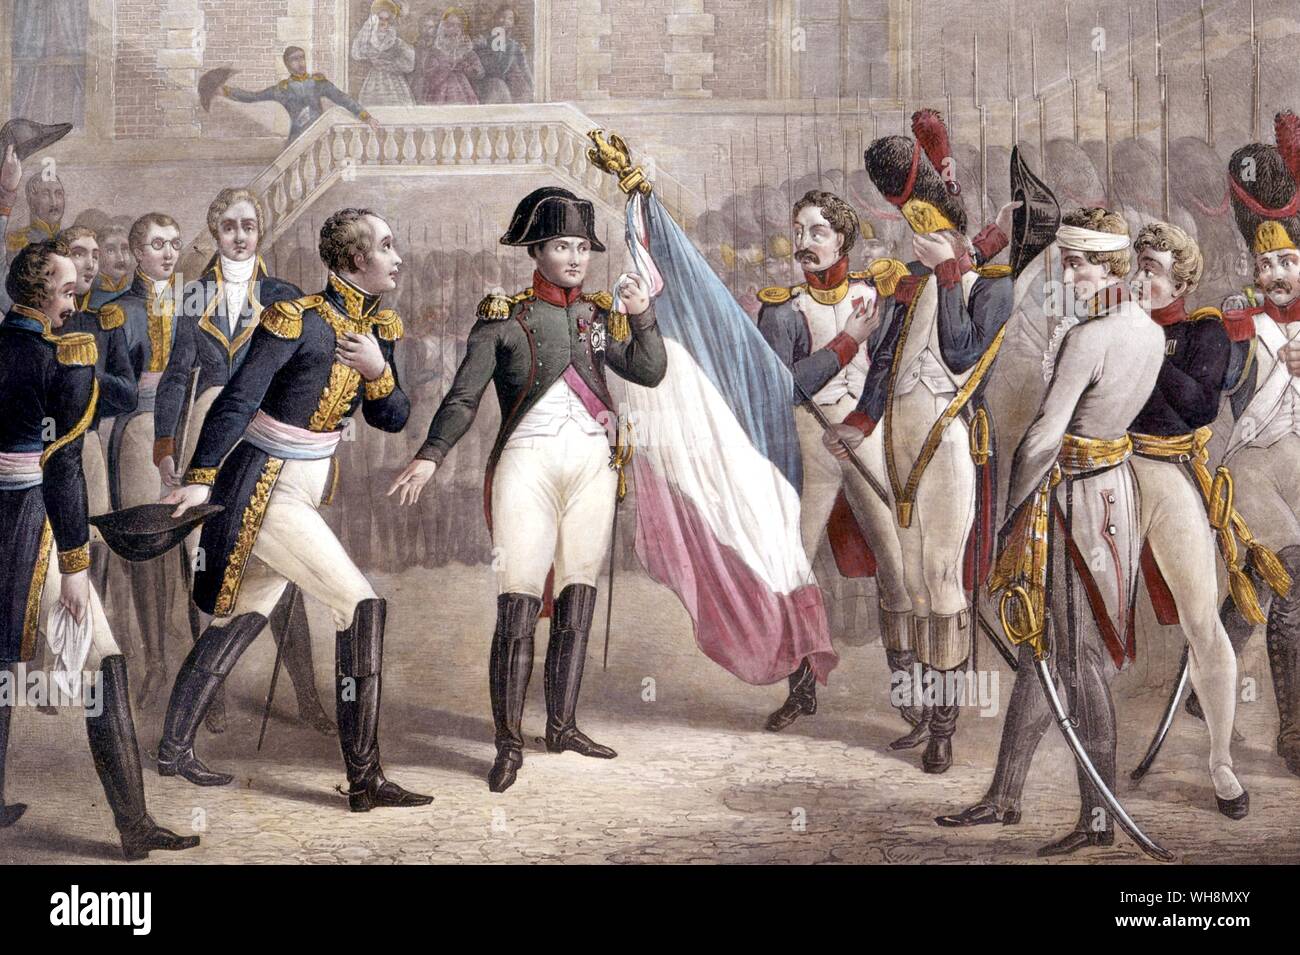 Adieux de Napoleon a son armee (Fontainbleau 20 April 1814) - '... one of the great sentimental set-pieces of Napoleonic iconography - something of a Last Supper': Bonaparte's farewell to the Guard at Fontainbleau on 20 April 1814. Bibliotheque Nationale, Paris. Stock Photo